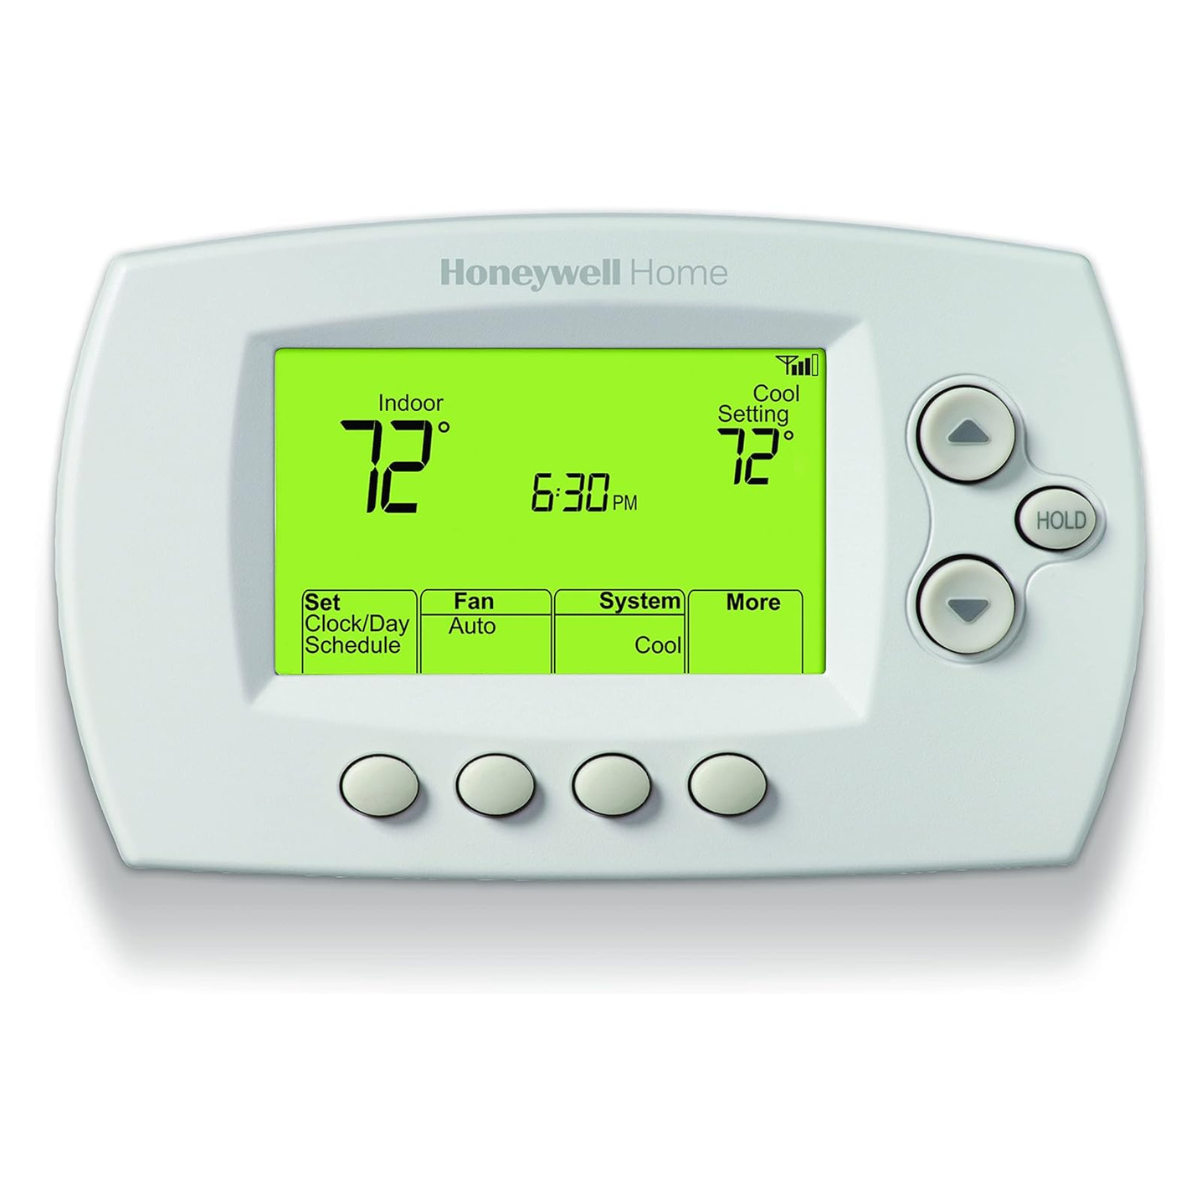 The Honeywell Home RTH6580 Smart Thermostat